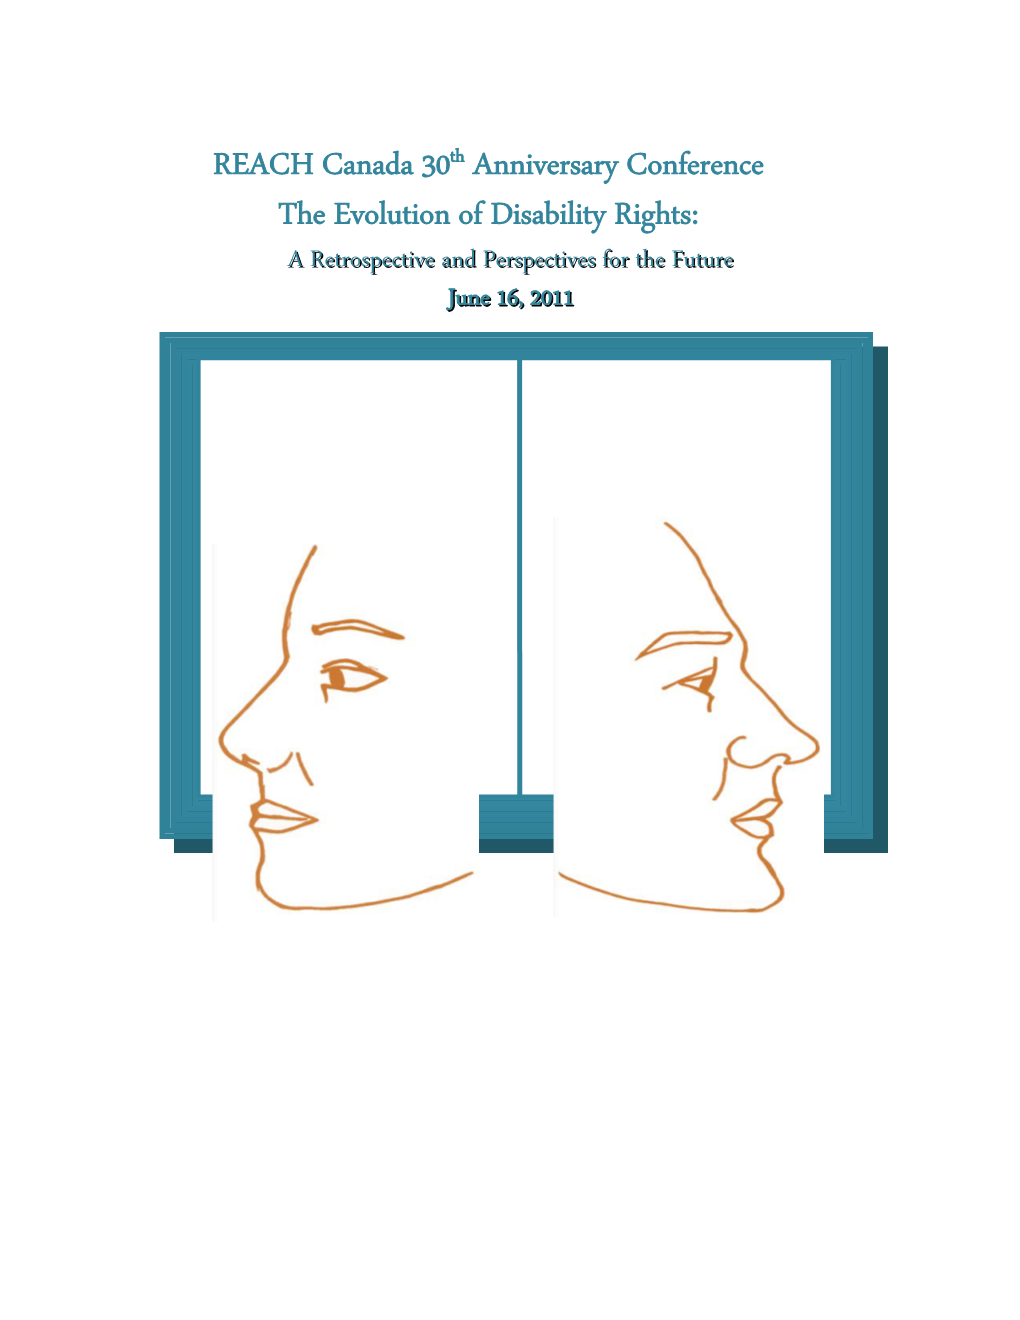 The Evolution of Disability Rights: a Retrospective and Perspectives for the Future